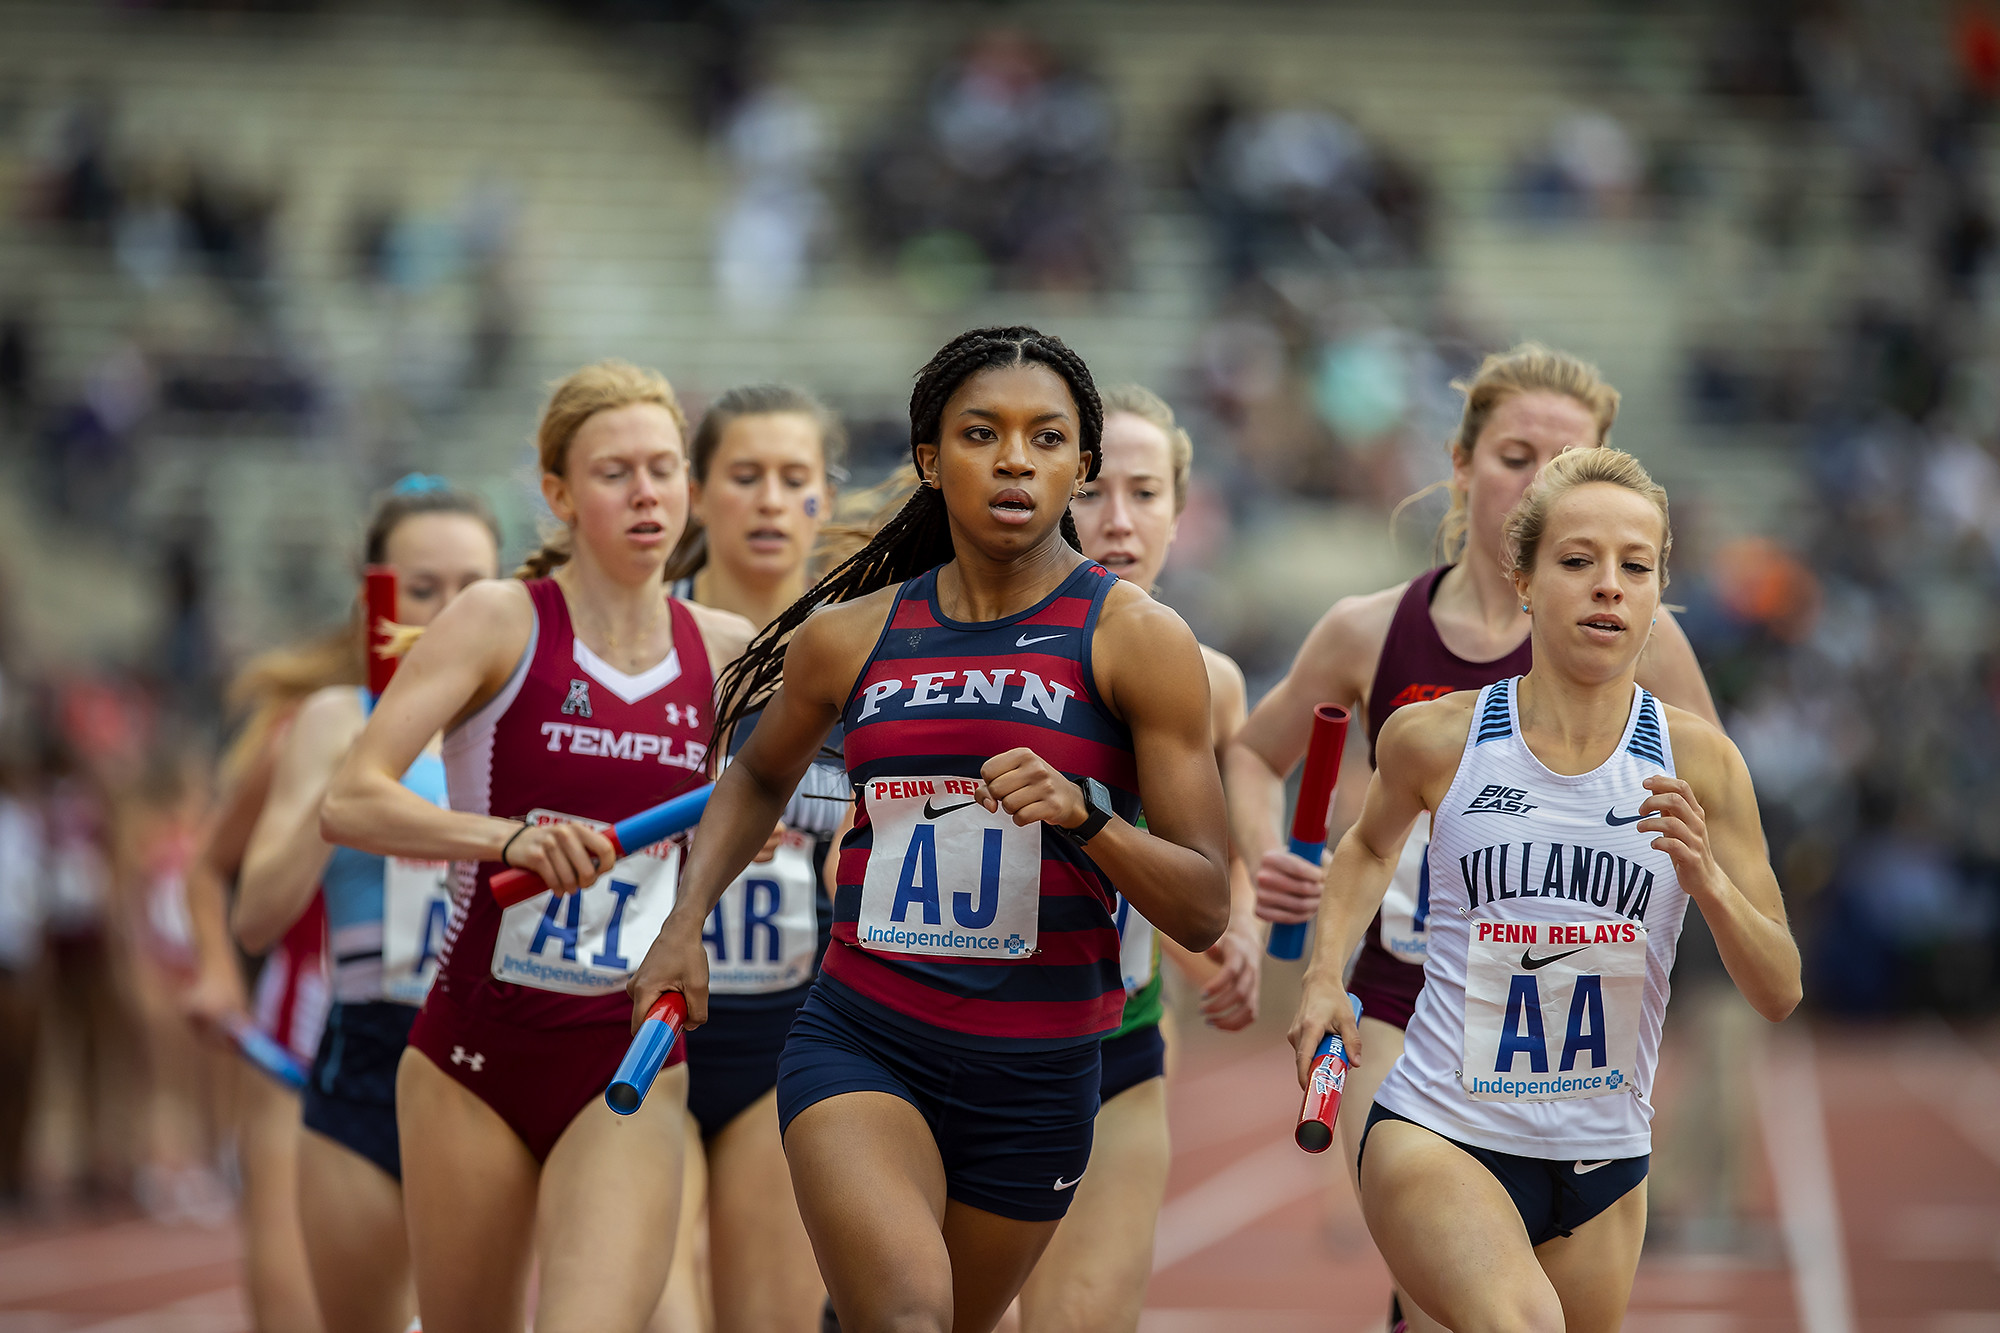 Nia Akins lead the pack during a race at the Penn Relays.